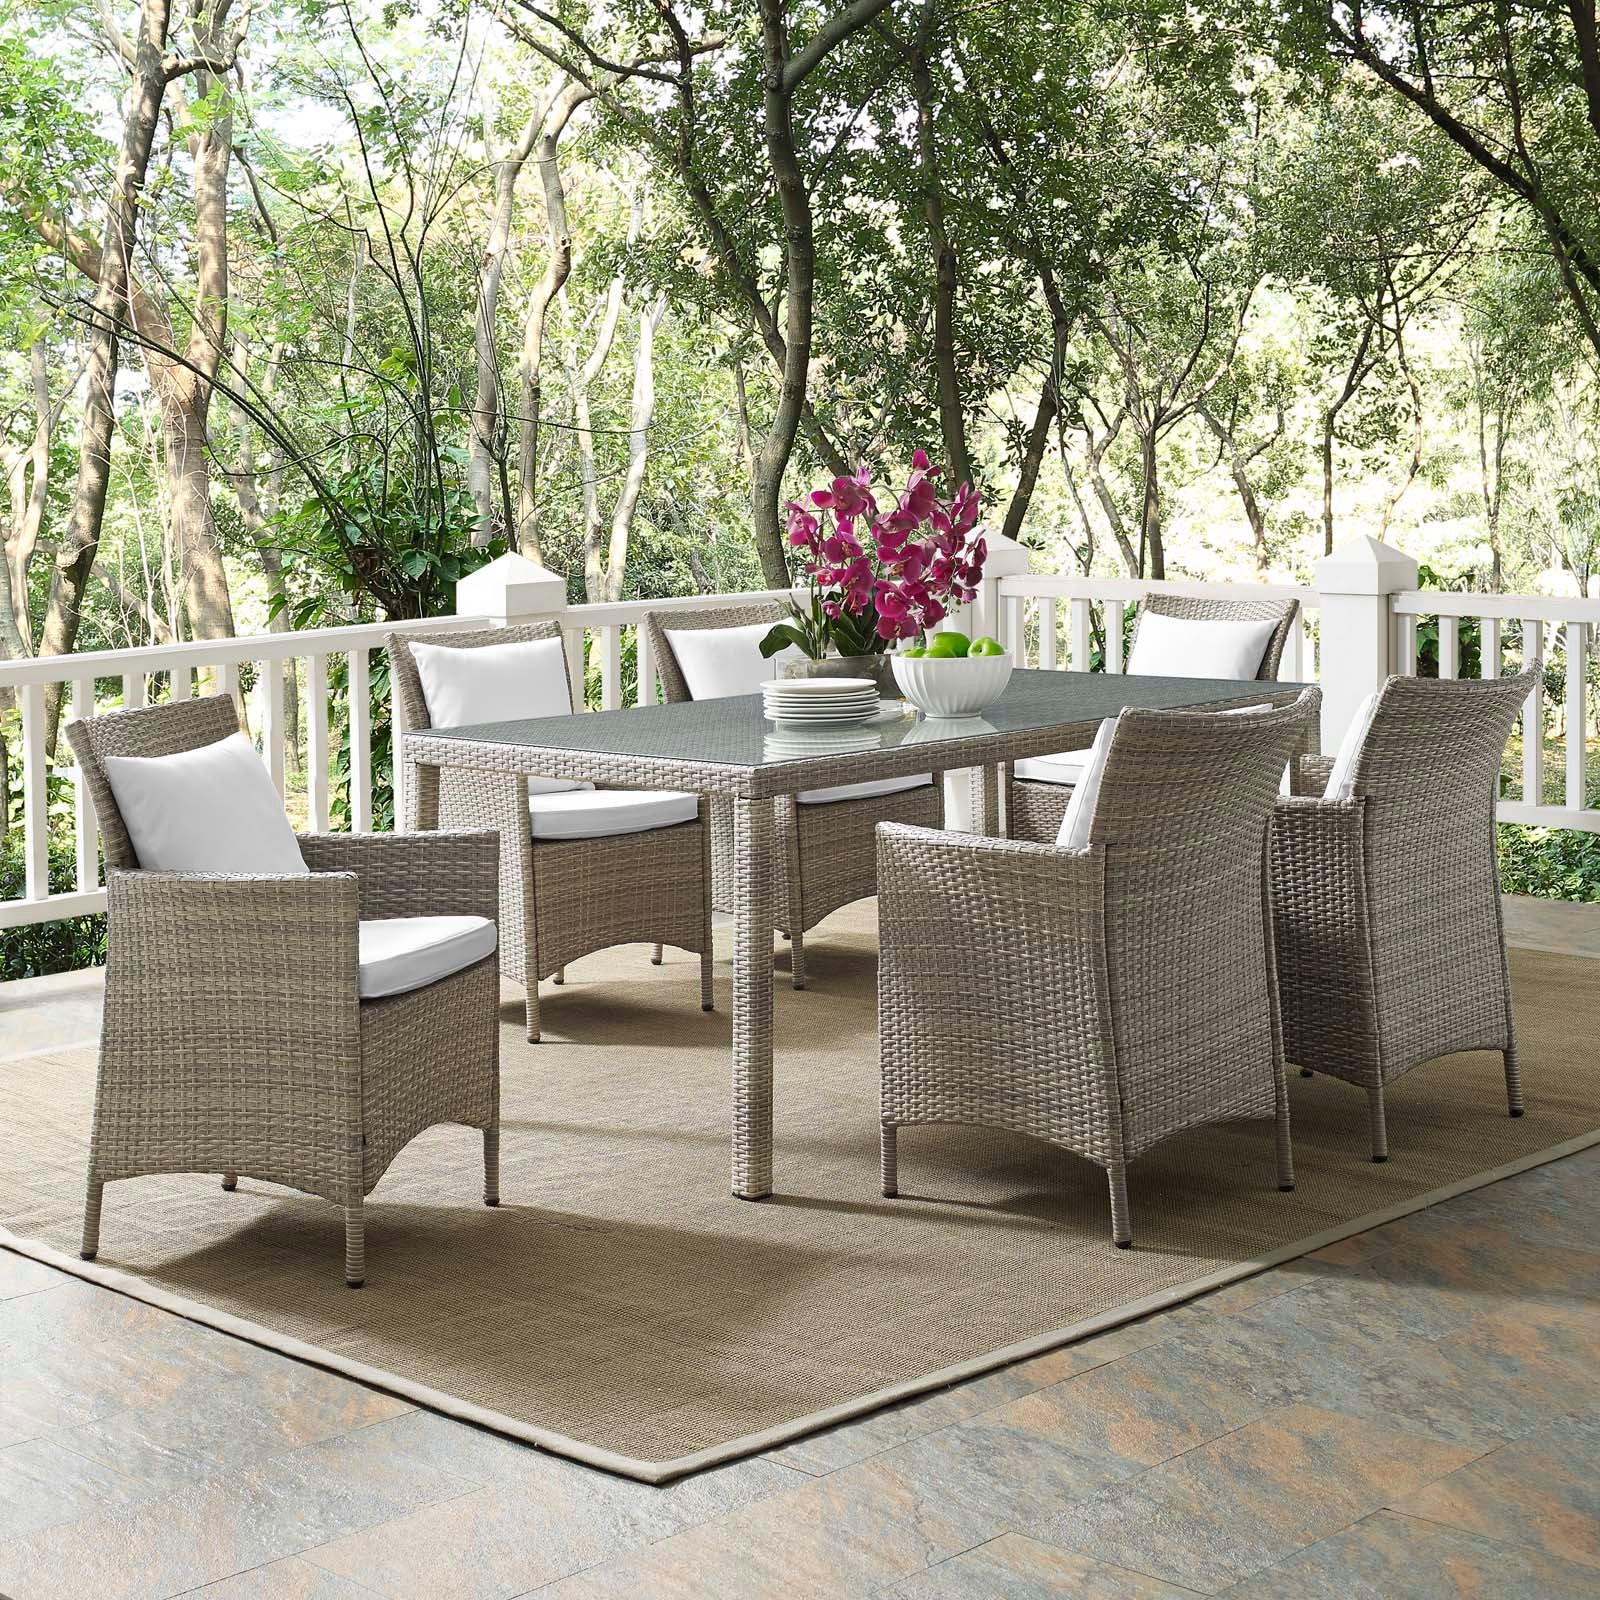 Modway Outdoor Dining Sets - Conduit 7 Piece Outdoor Patio Wicker Rattan Dining Set Light Gray White